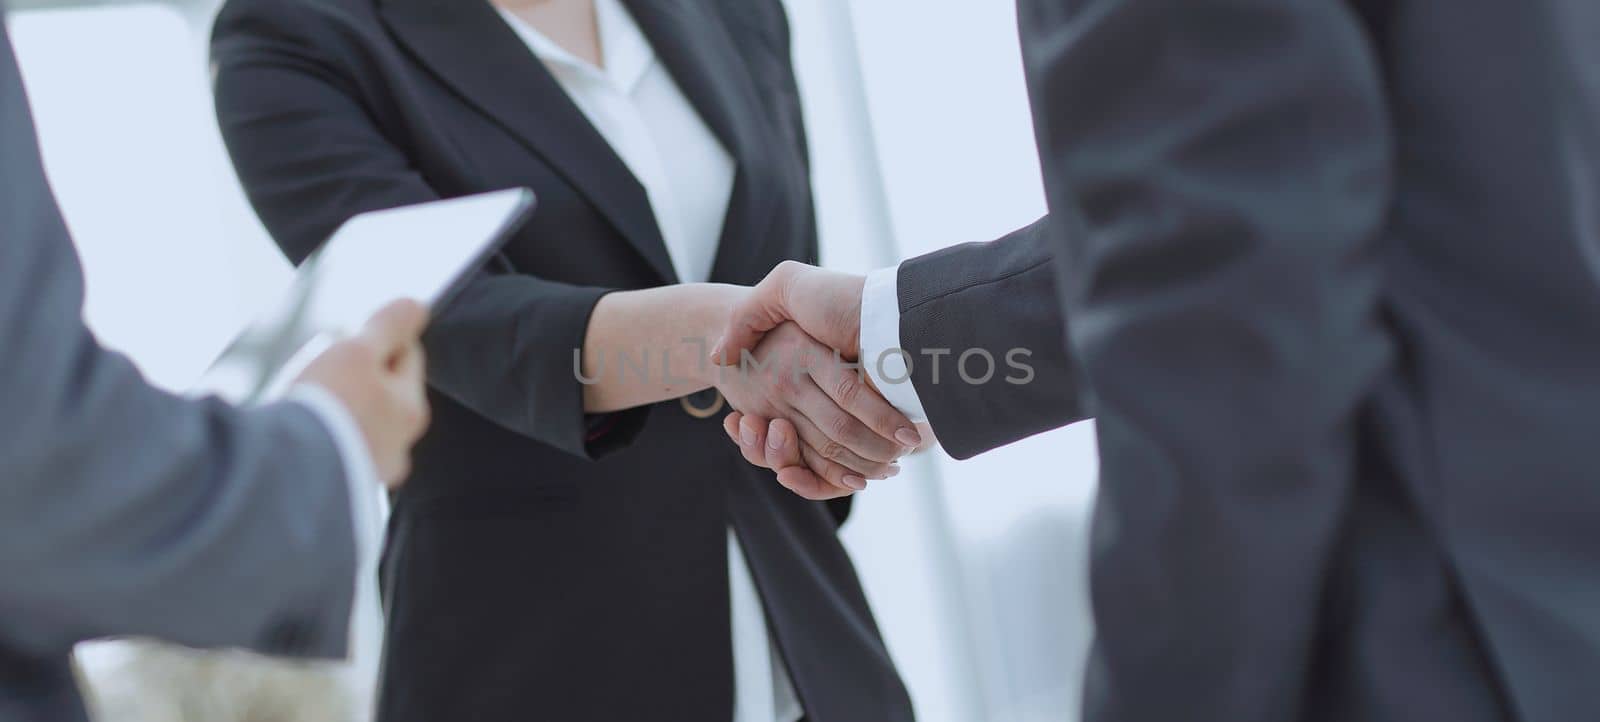 Businesswoman shaking hands with a businssman during a meeting by asdf